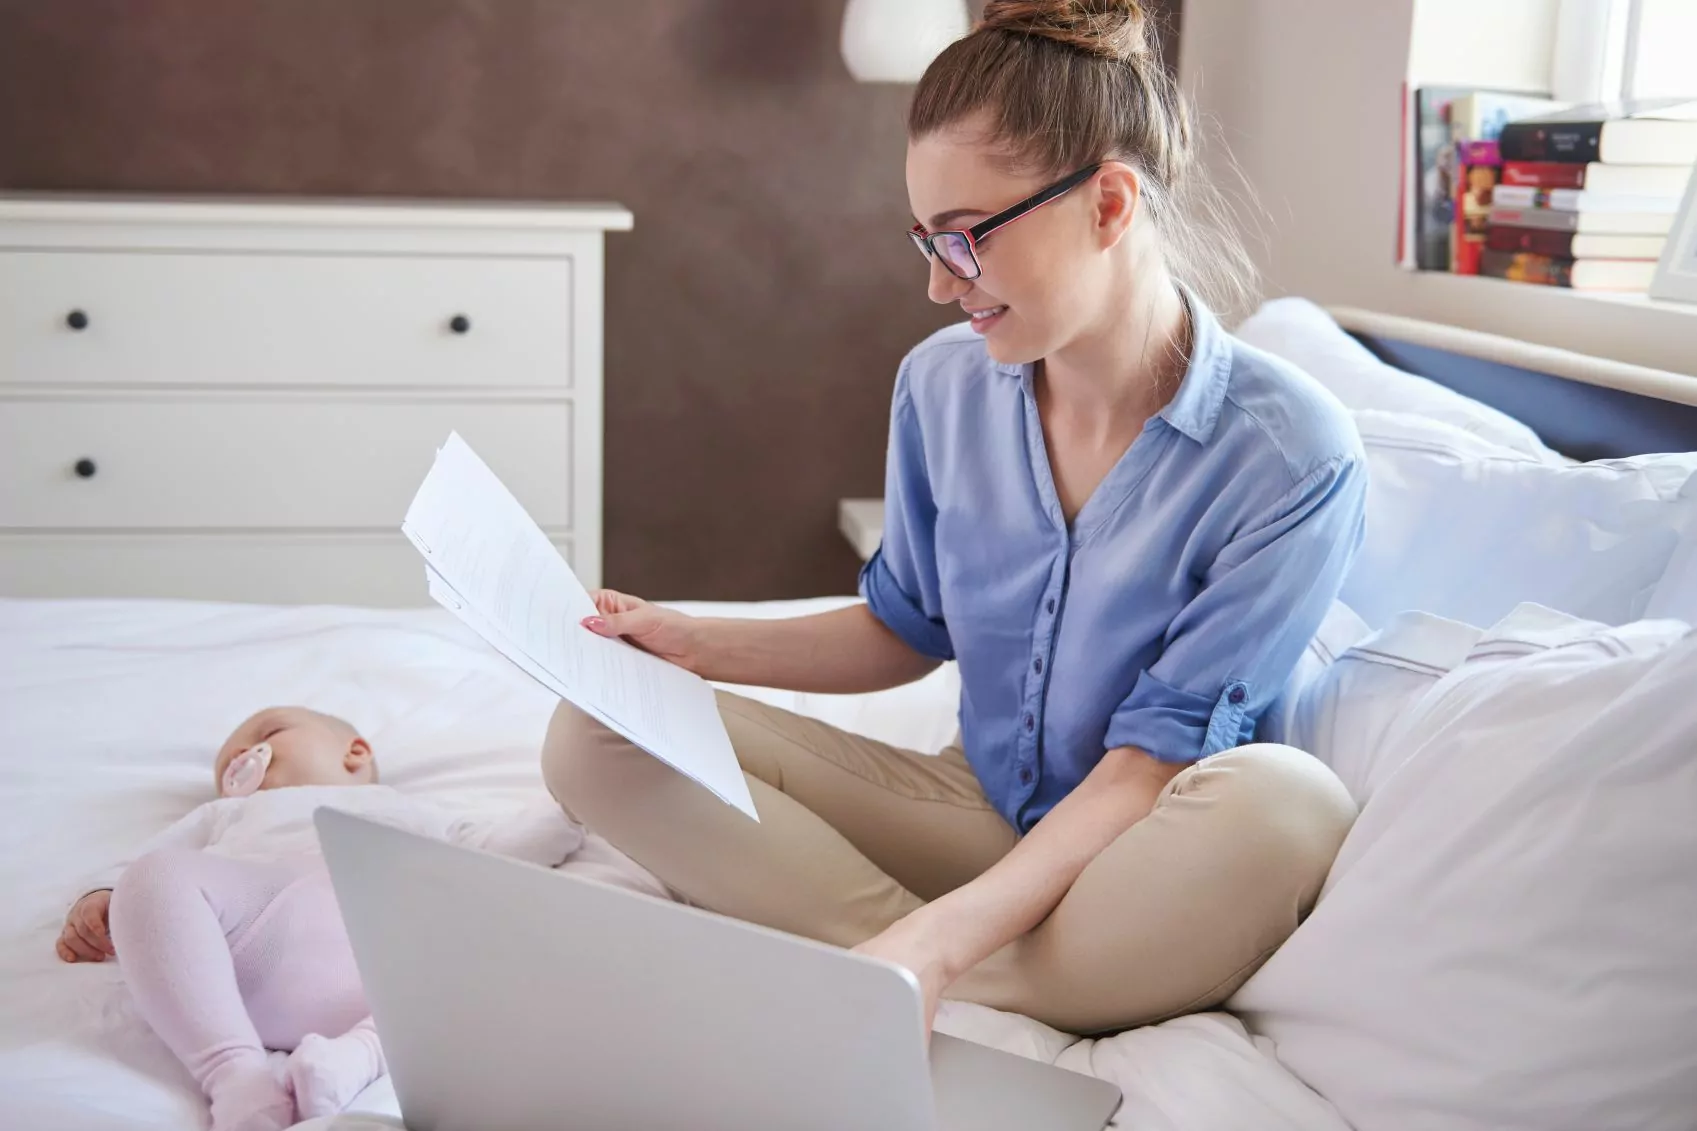 8 Life Skills Every Working Mom Should Master